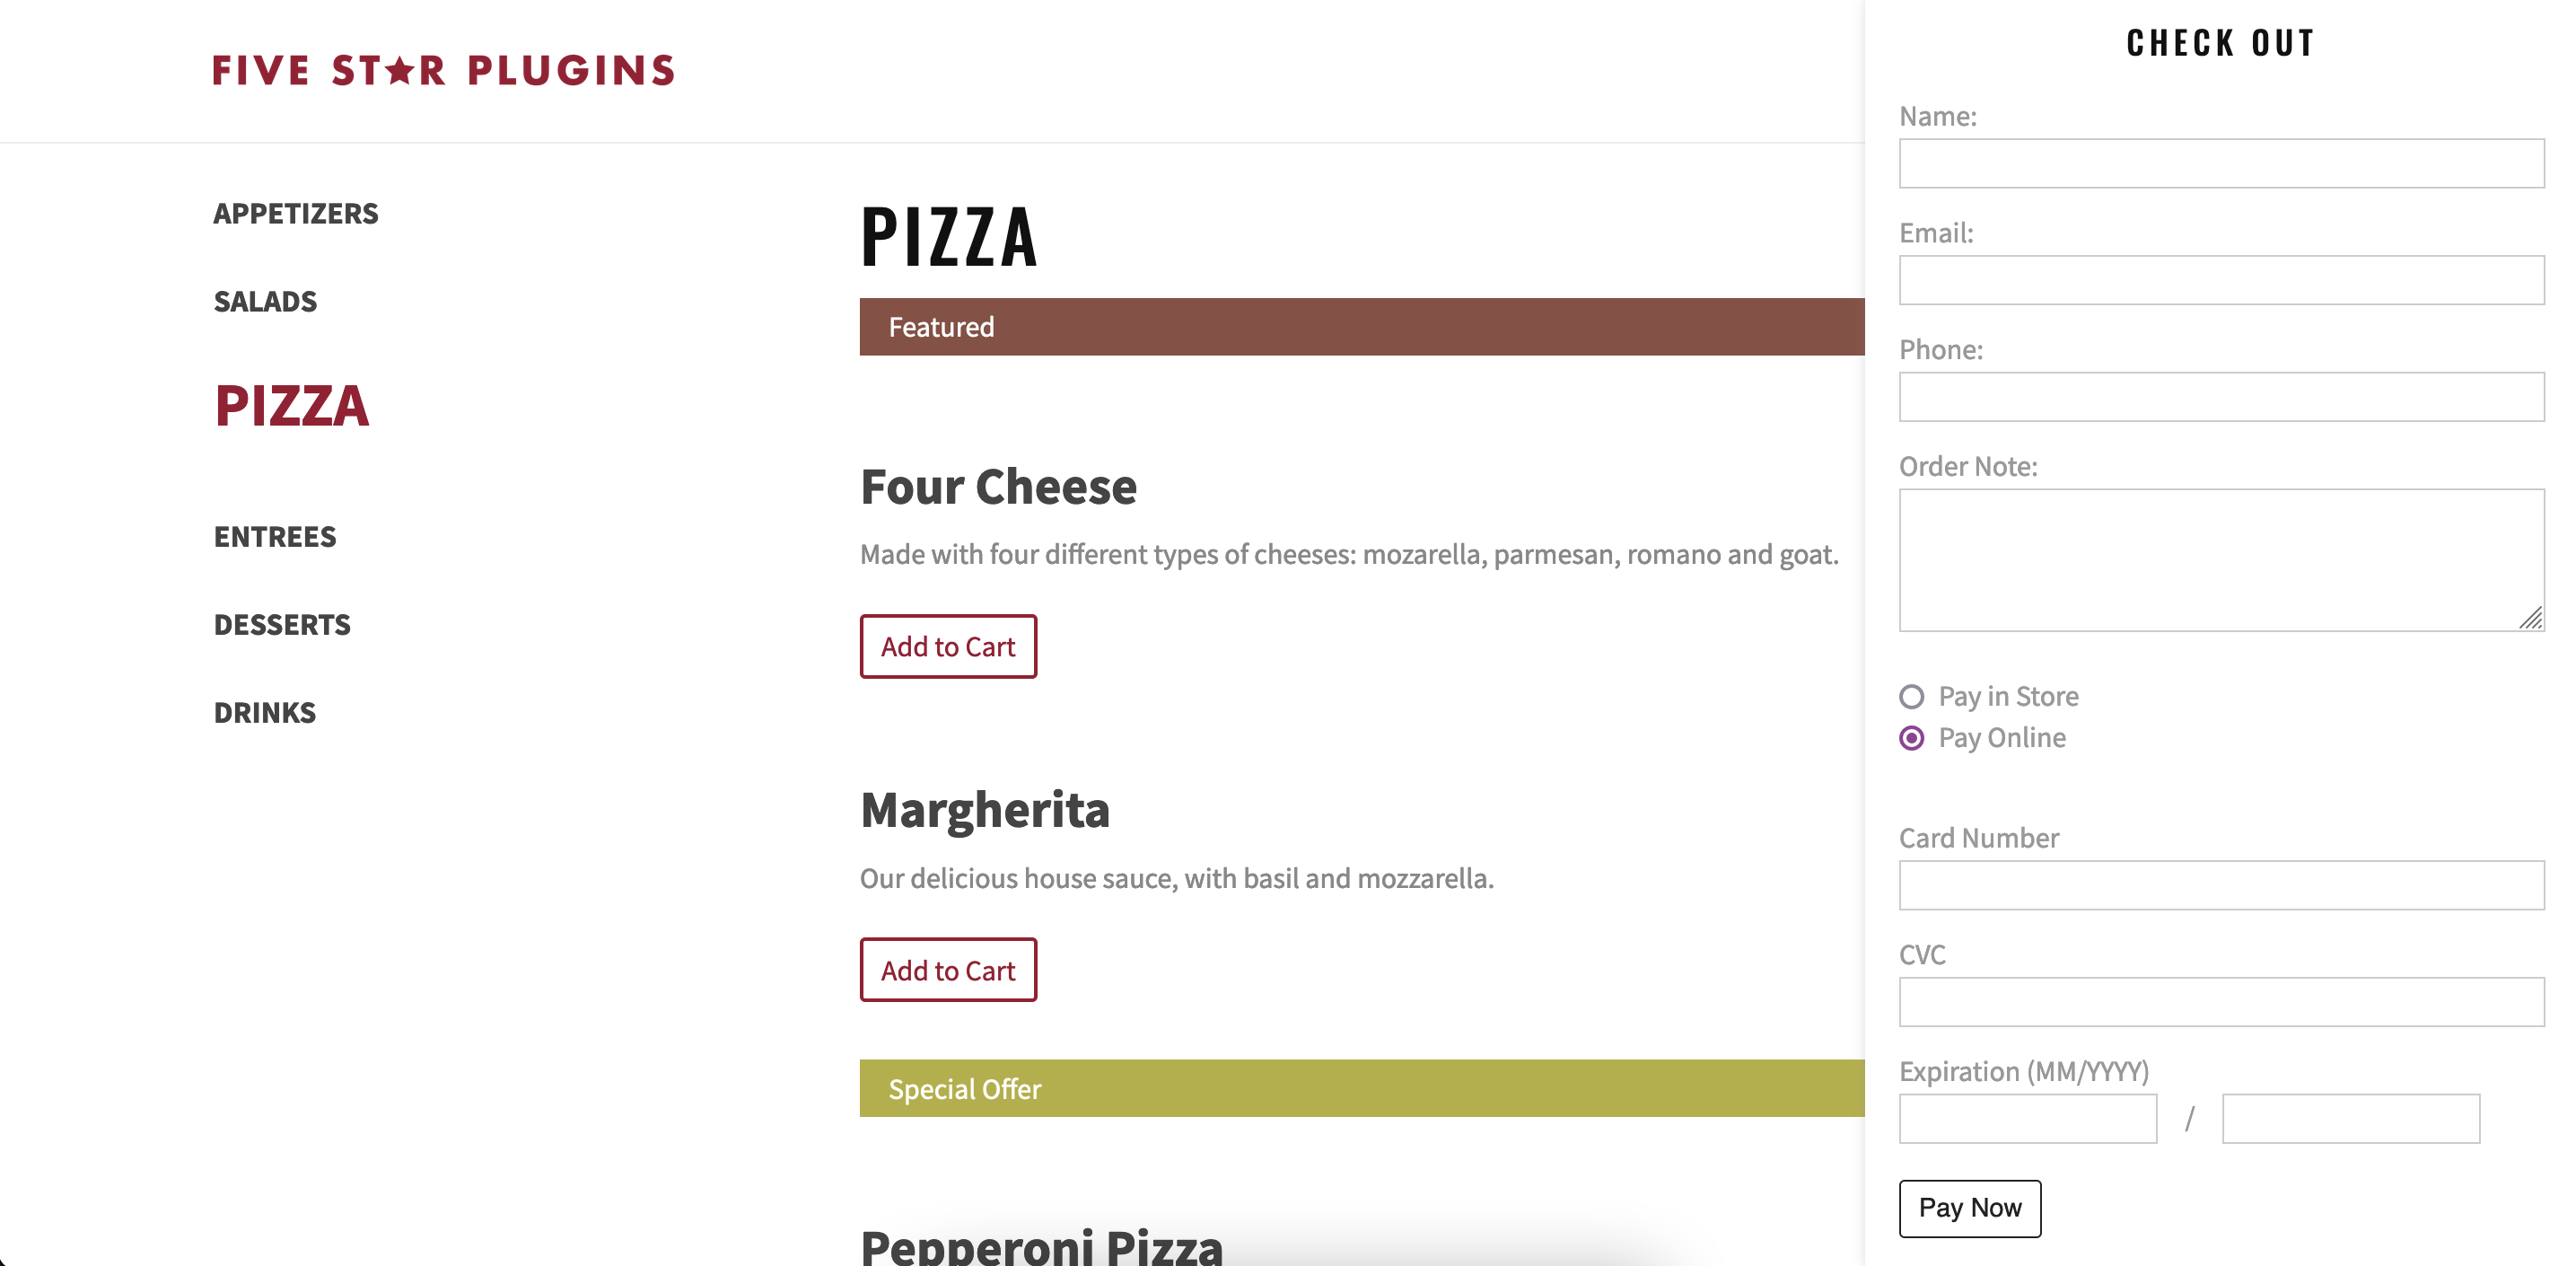 Classic menu style in a two-column layout.